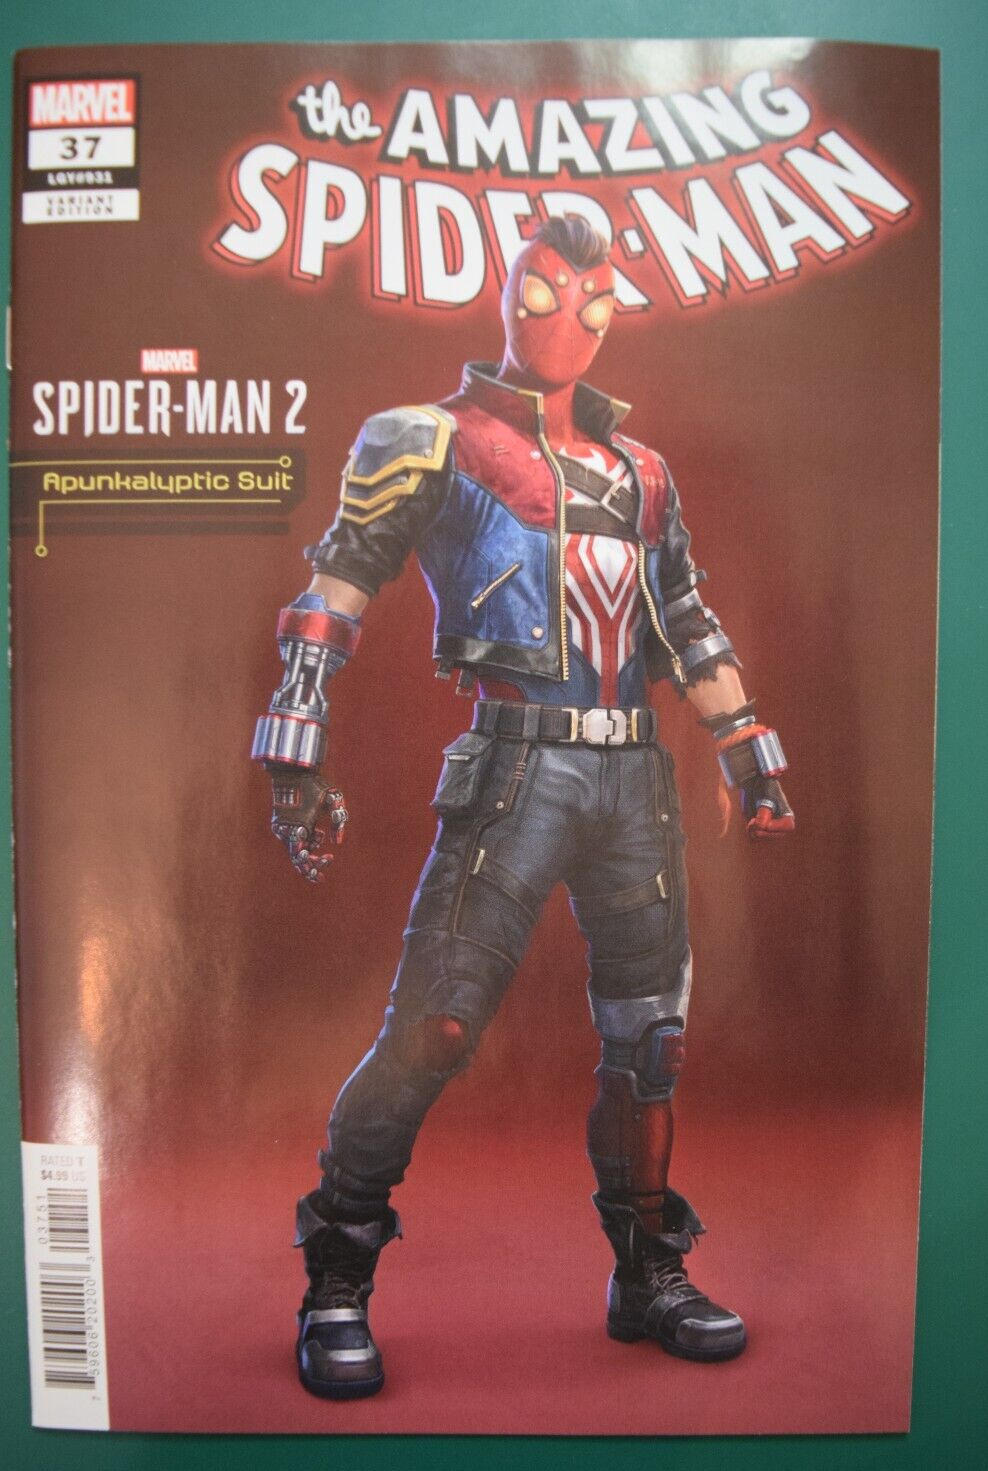 AMAZING SPIDER-MAN #37 Apunkalyptic Suit Spider-Man 2 Variant NM- or better